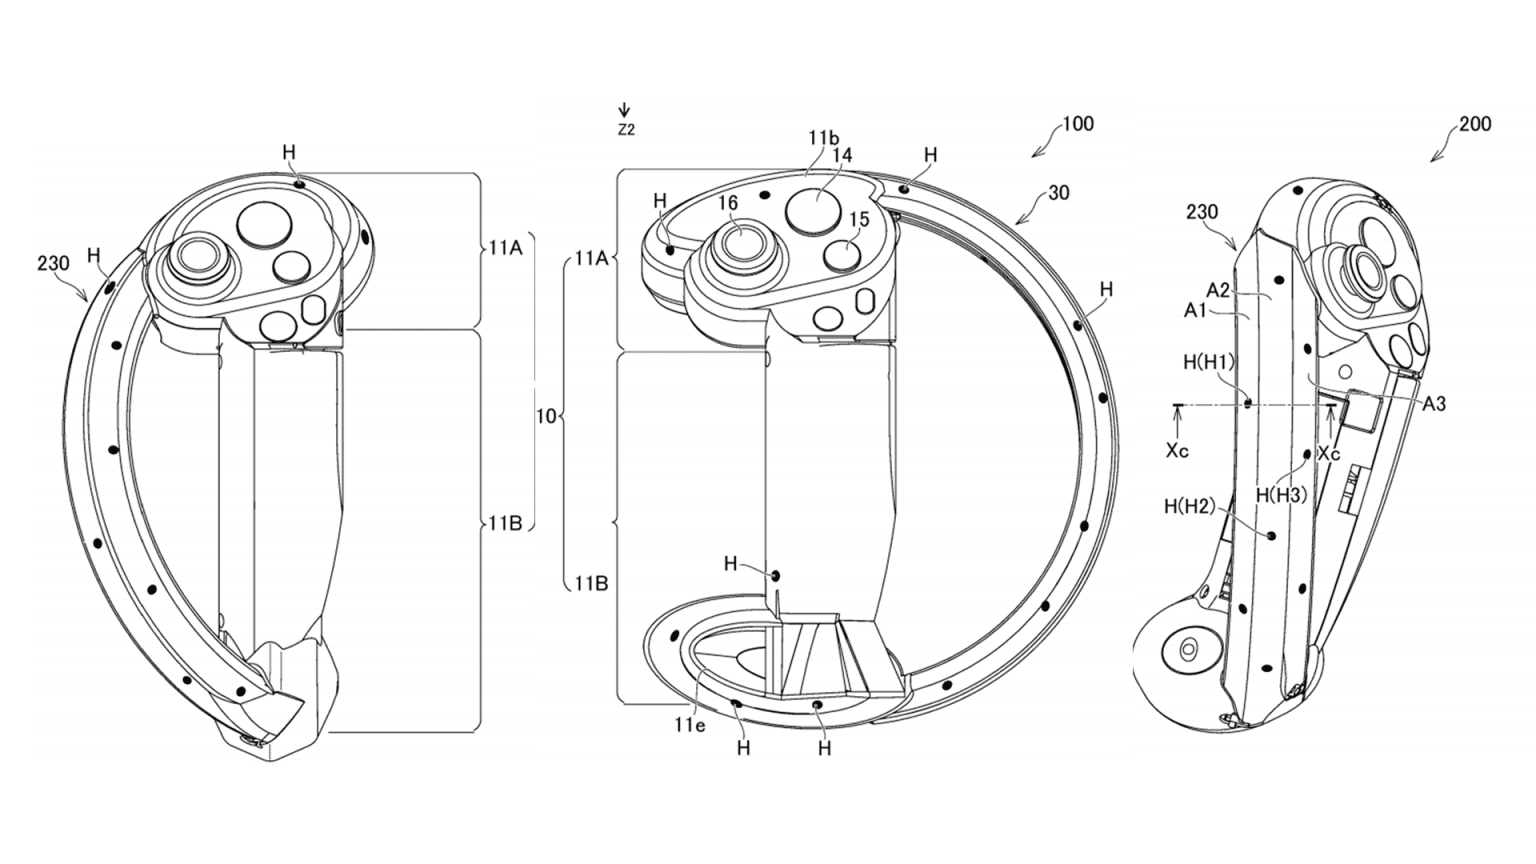 New Sony PSVR Controllers Patent